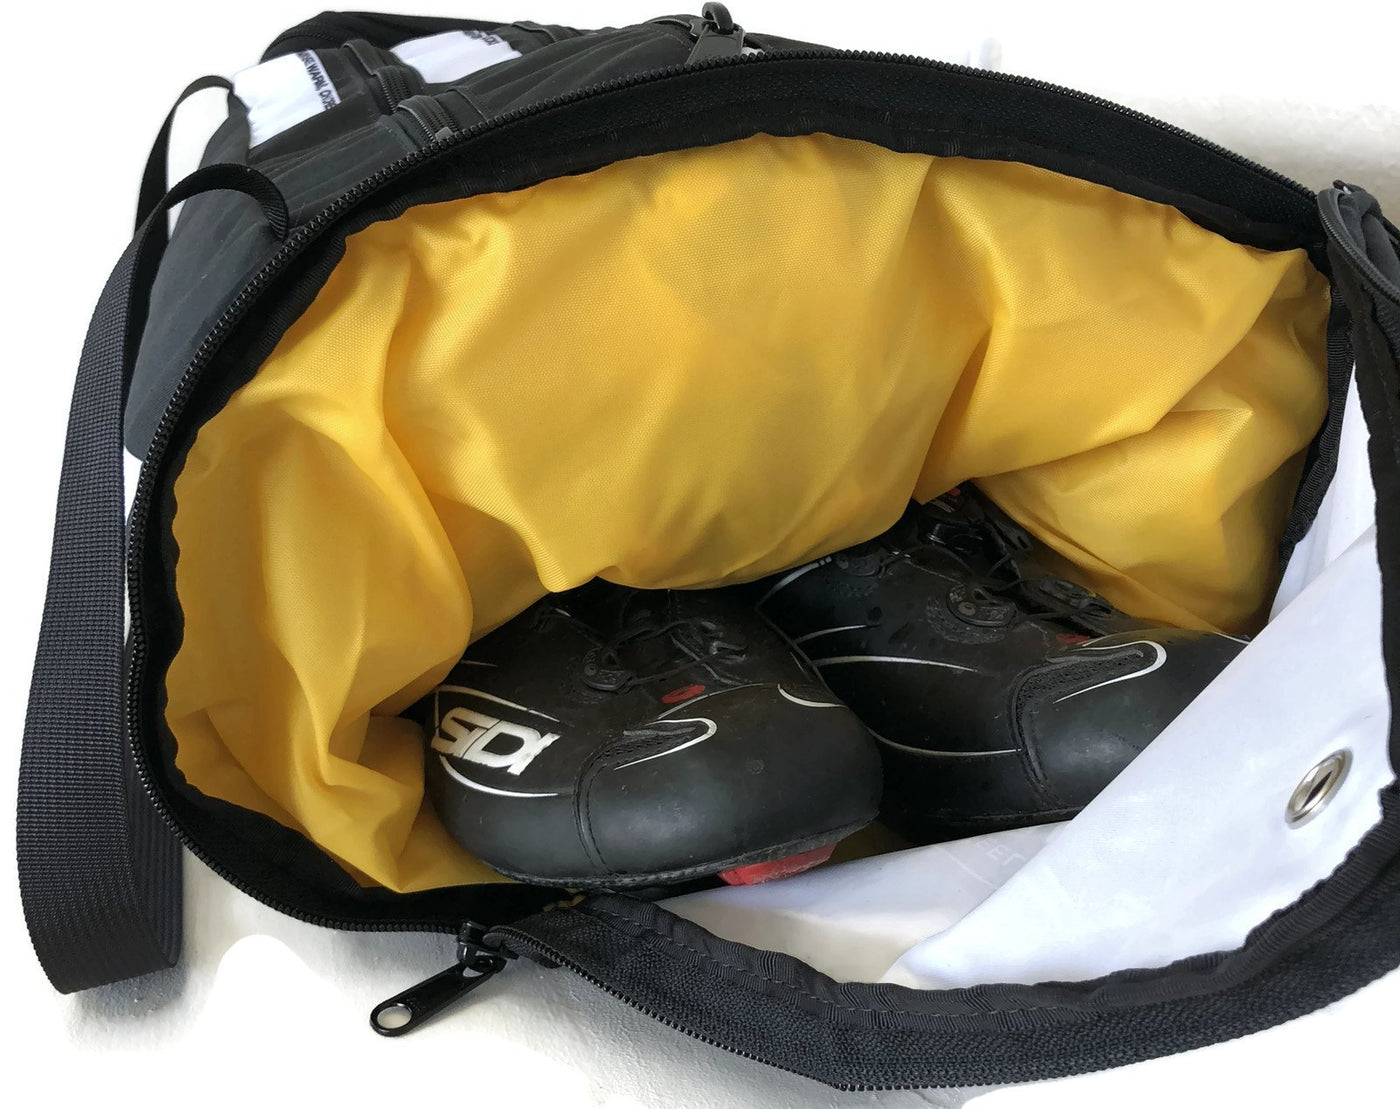 Fred Trails 08-2019 RACEDAY BAG